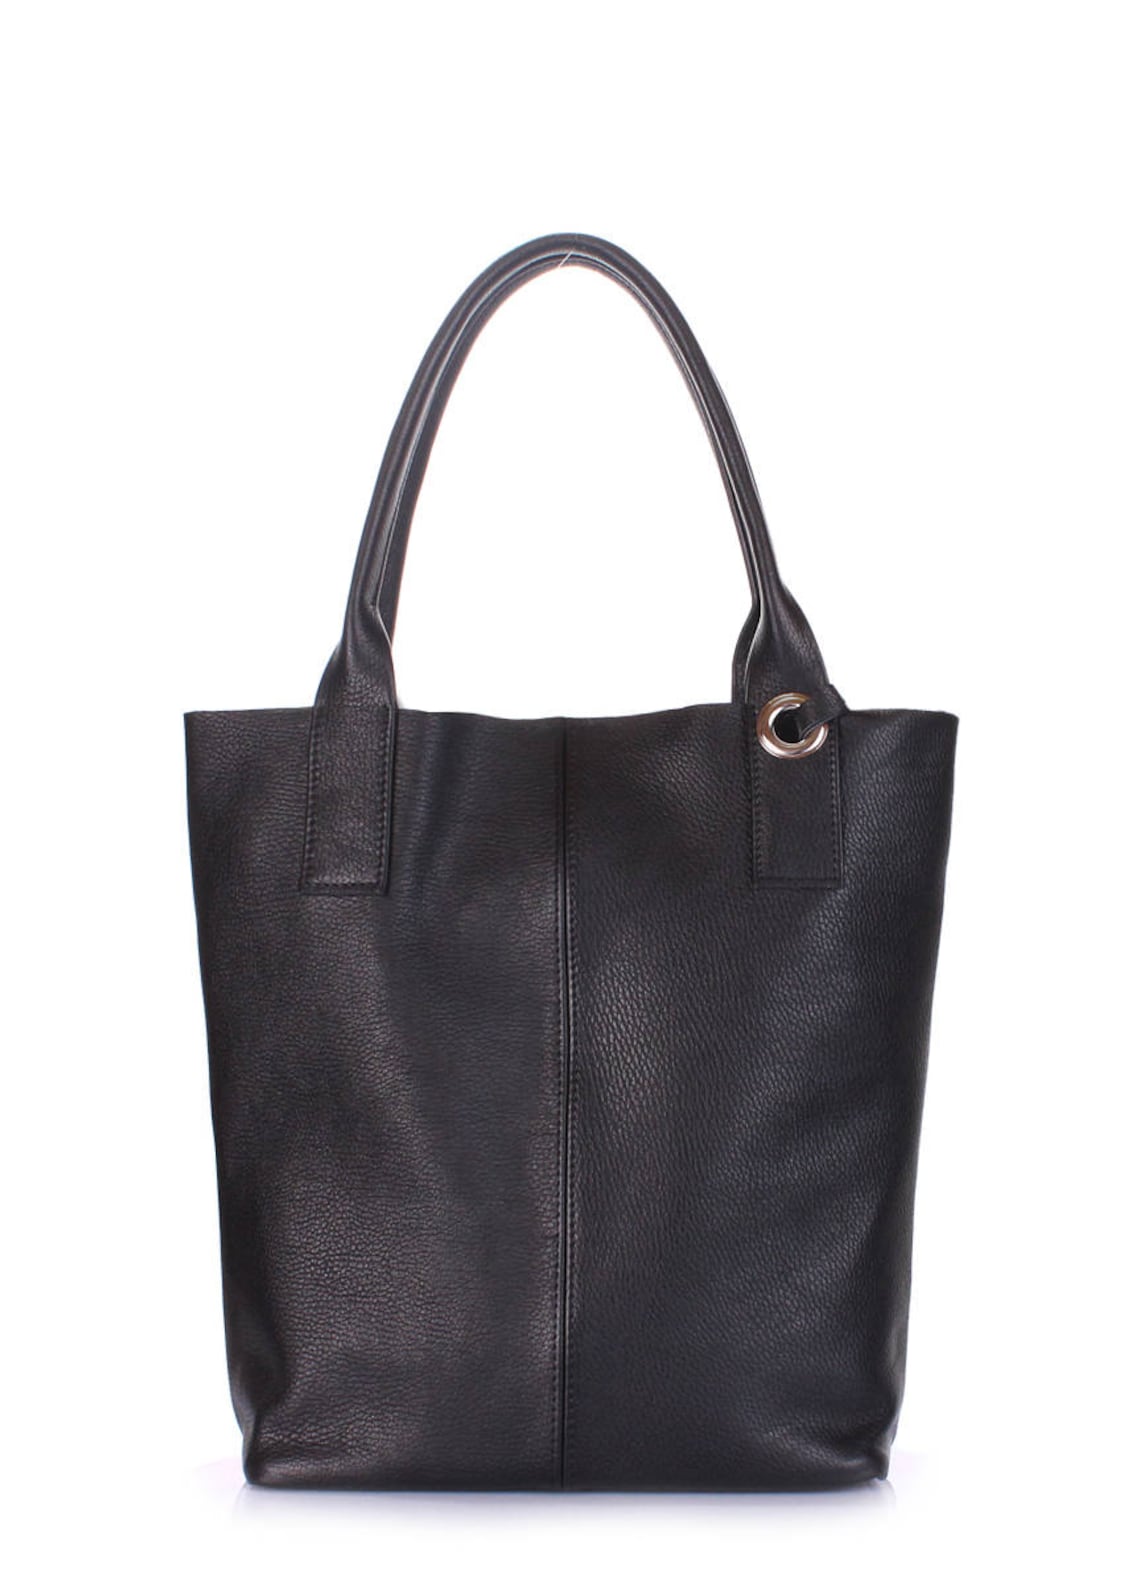 Silver Leather Tote Bag Leather Bag Silver Tote Women Tote - Etsy Australia